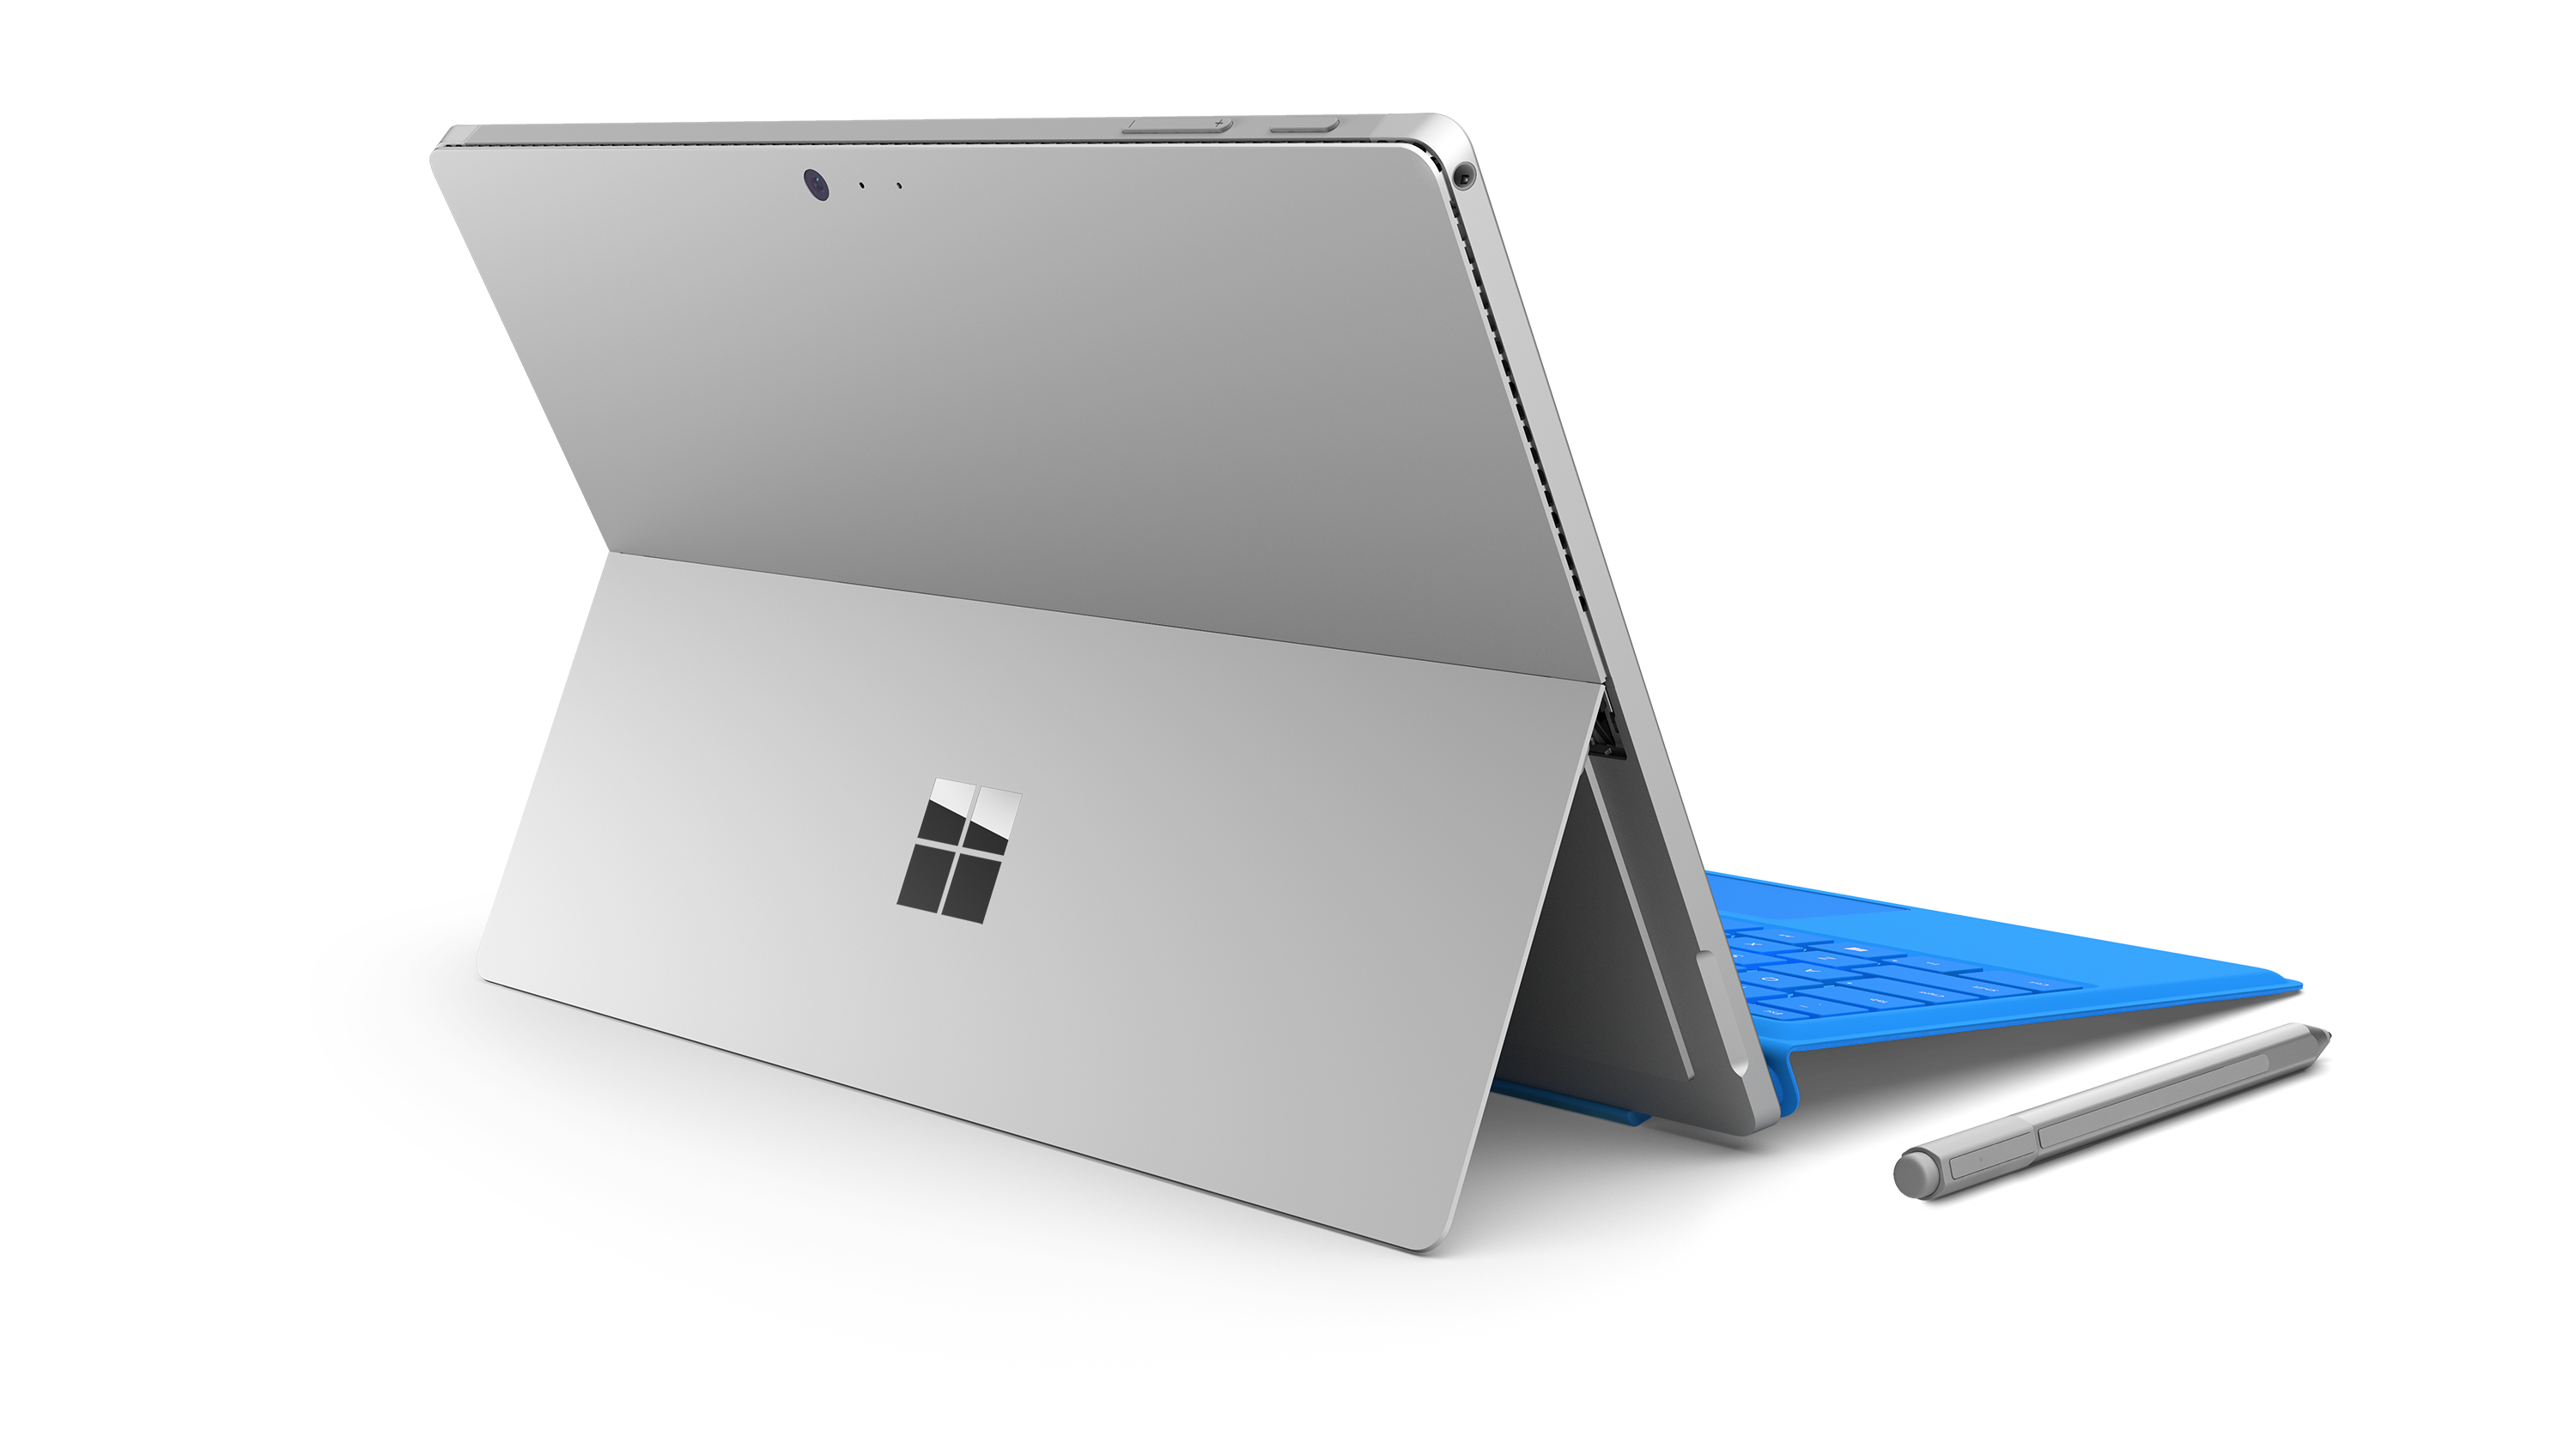 Microsoft unveils Surface Pro 4, but will you want it?